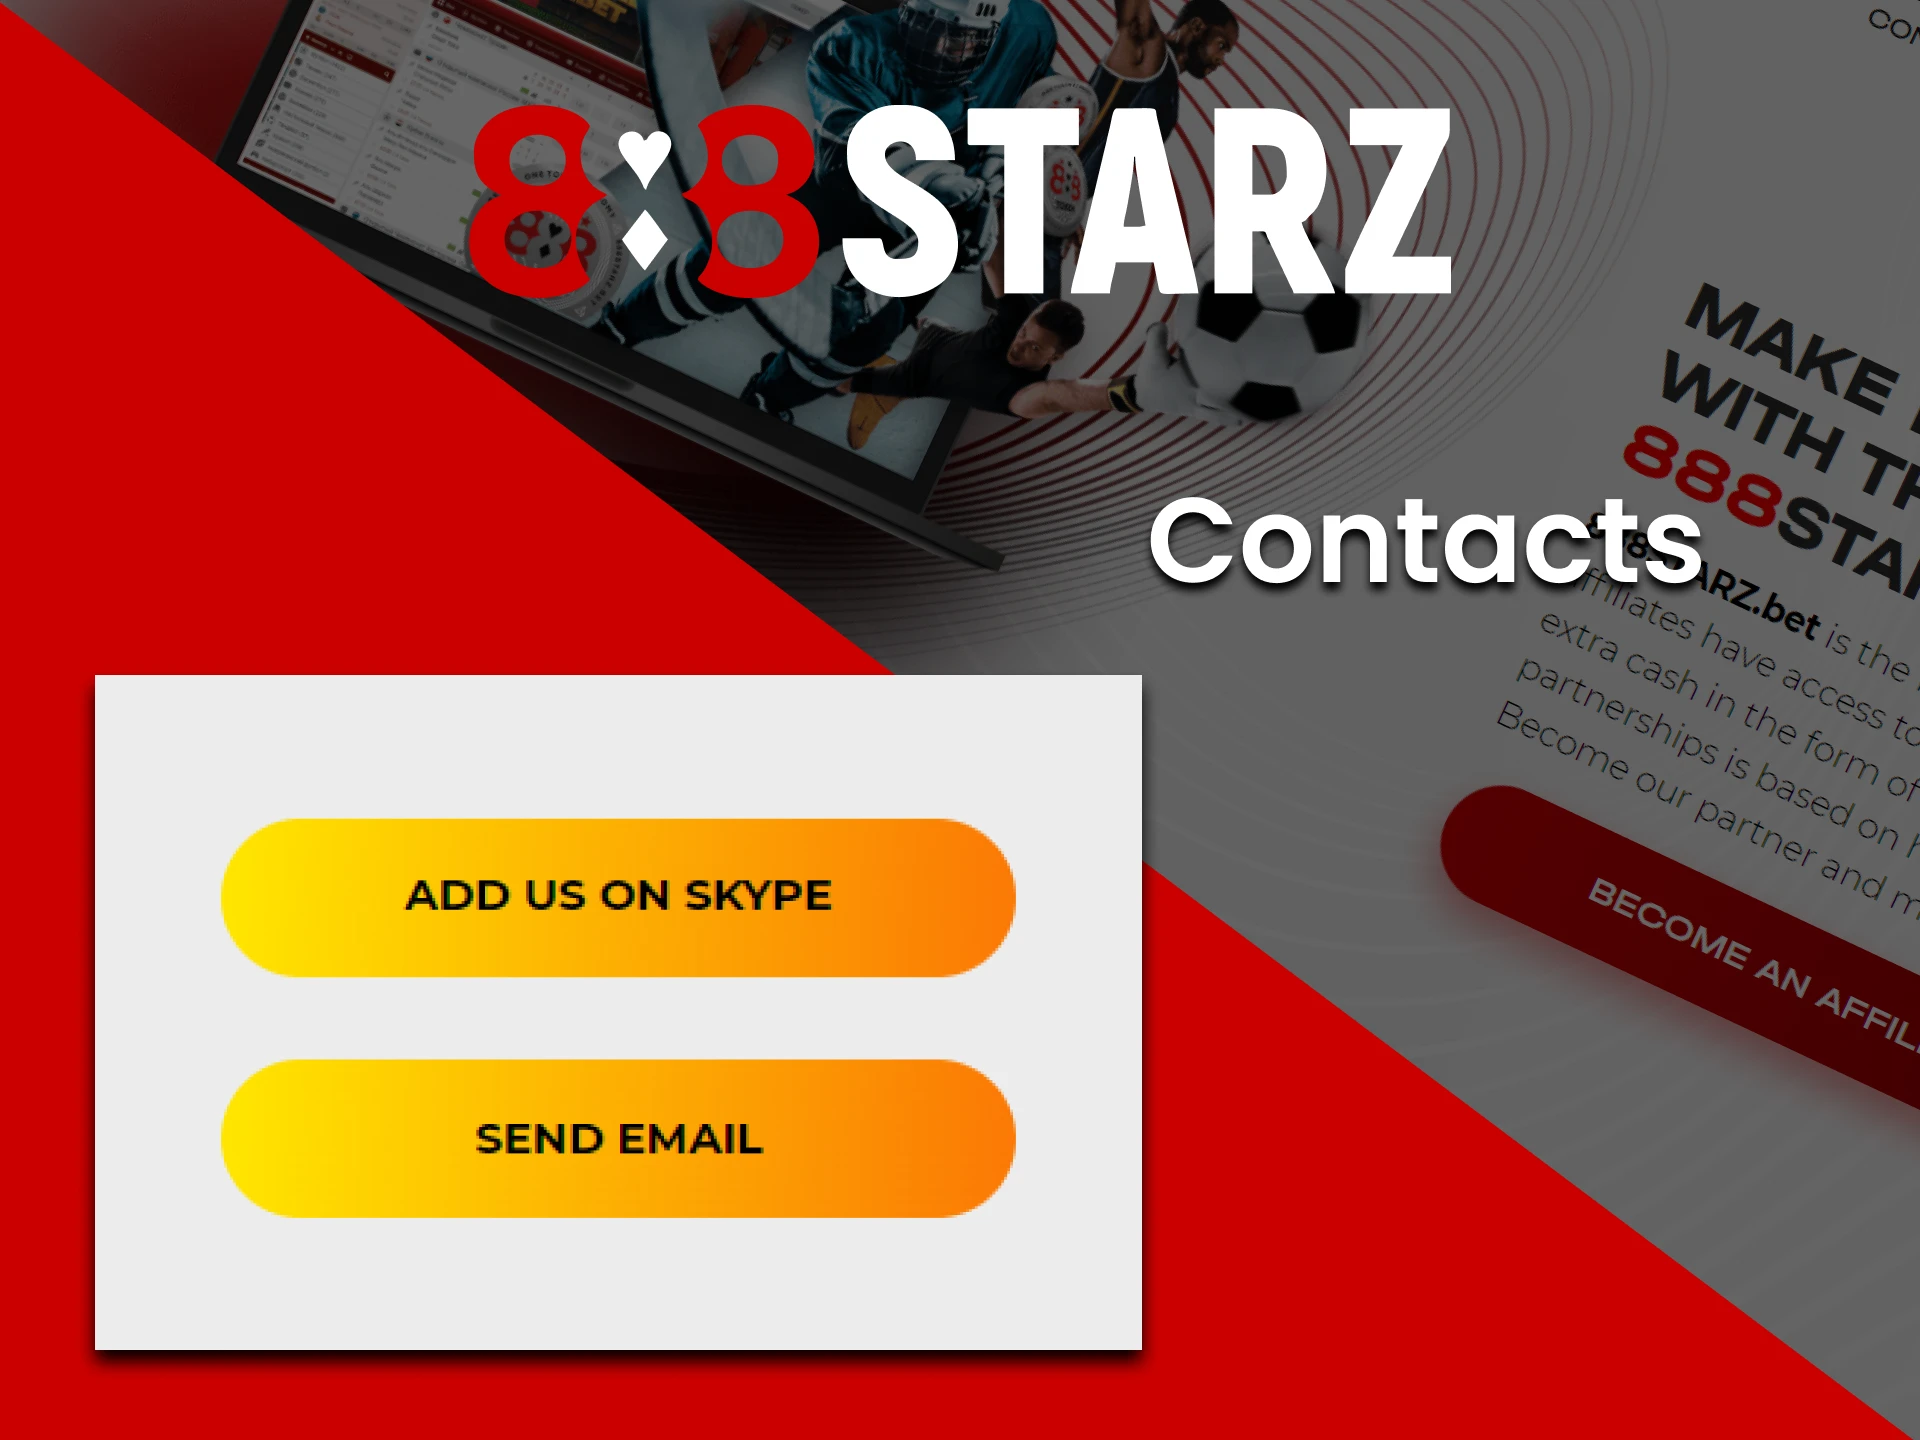 Contact 888starz staff by using contacts.